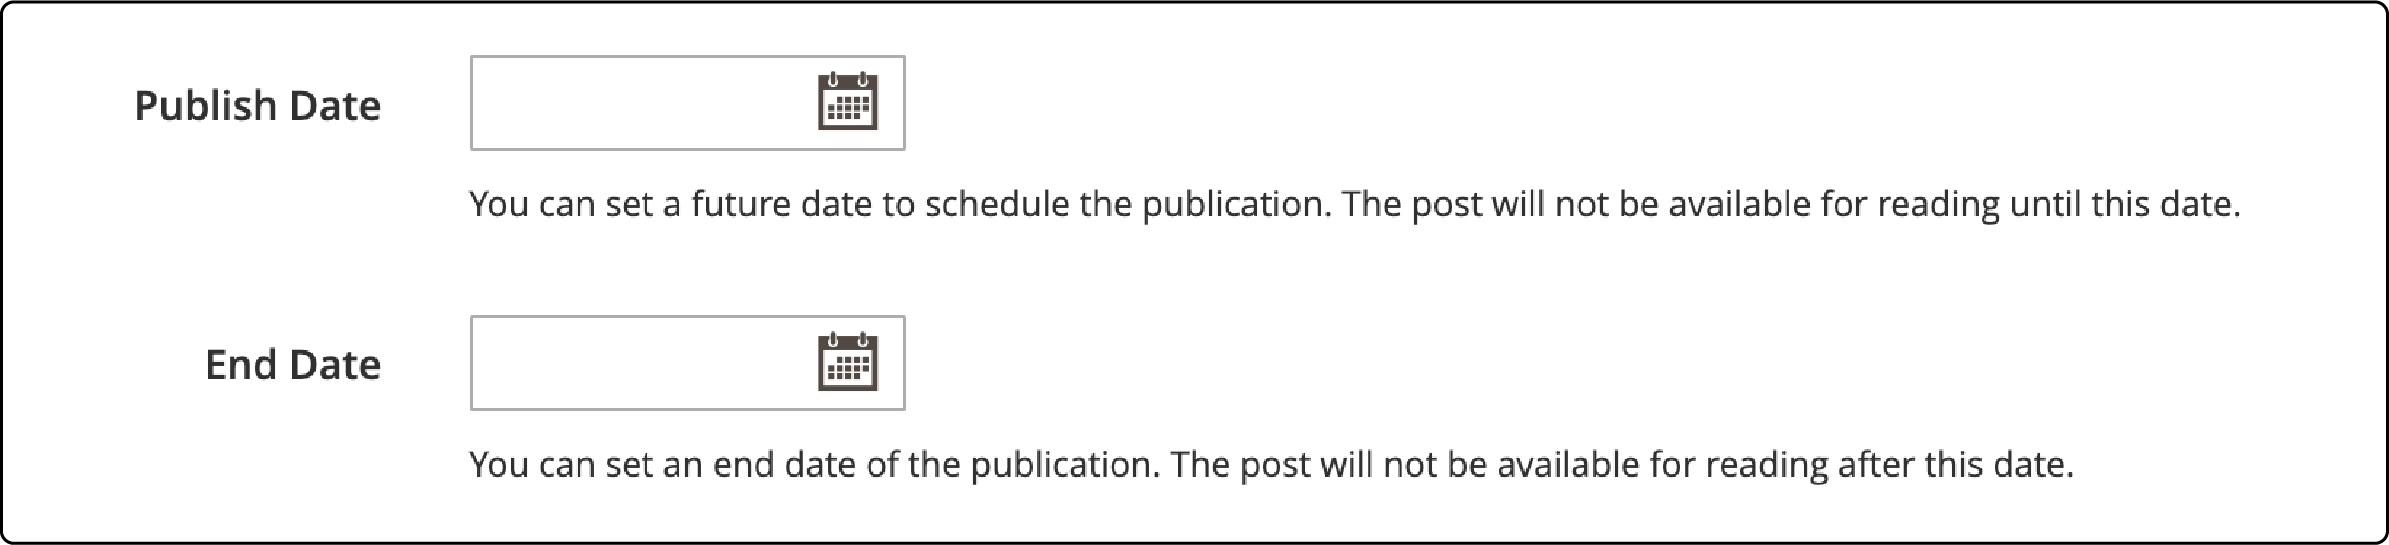 Guide on setting publication dates for timely blog post releases in Magento.